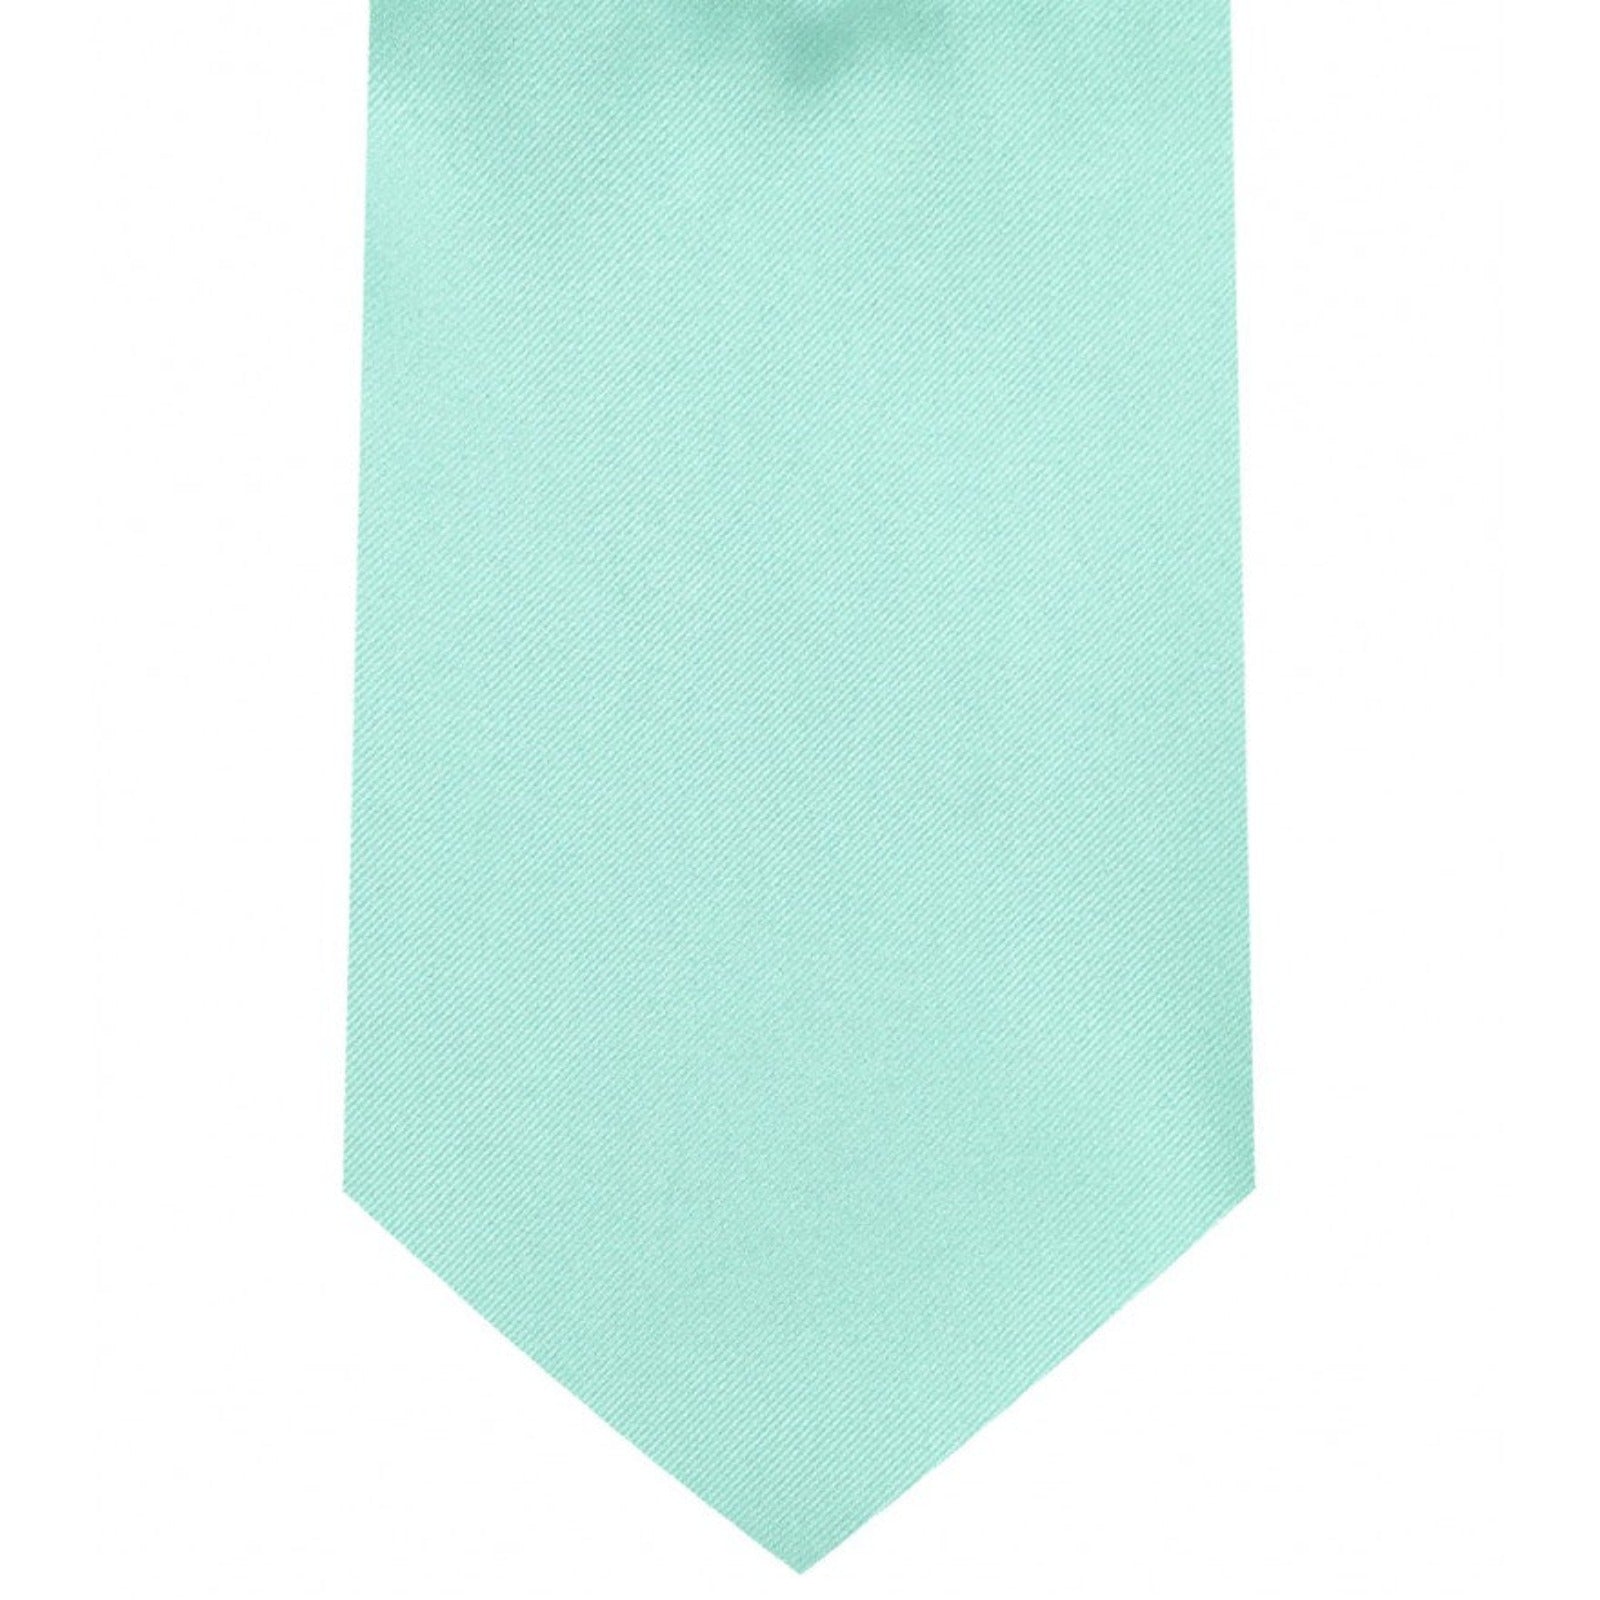 Classic Aqua Tie Regular width 3.5 inches With Matching Pocket Square | KCT Menswear